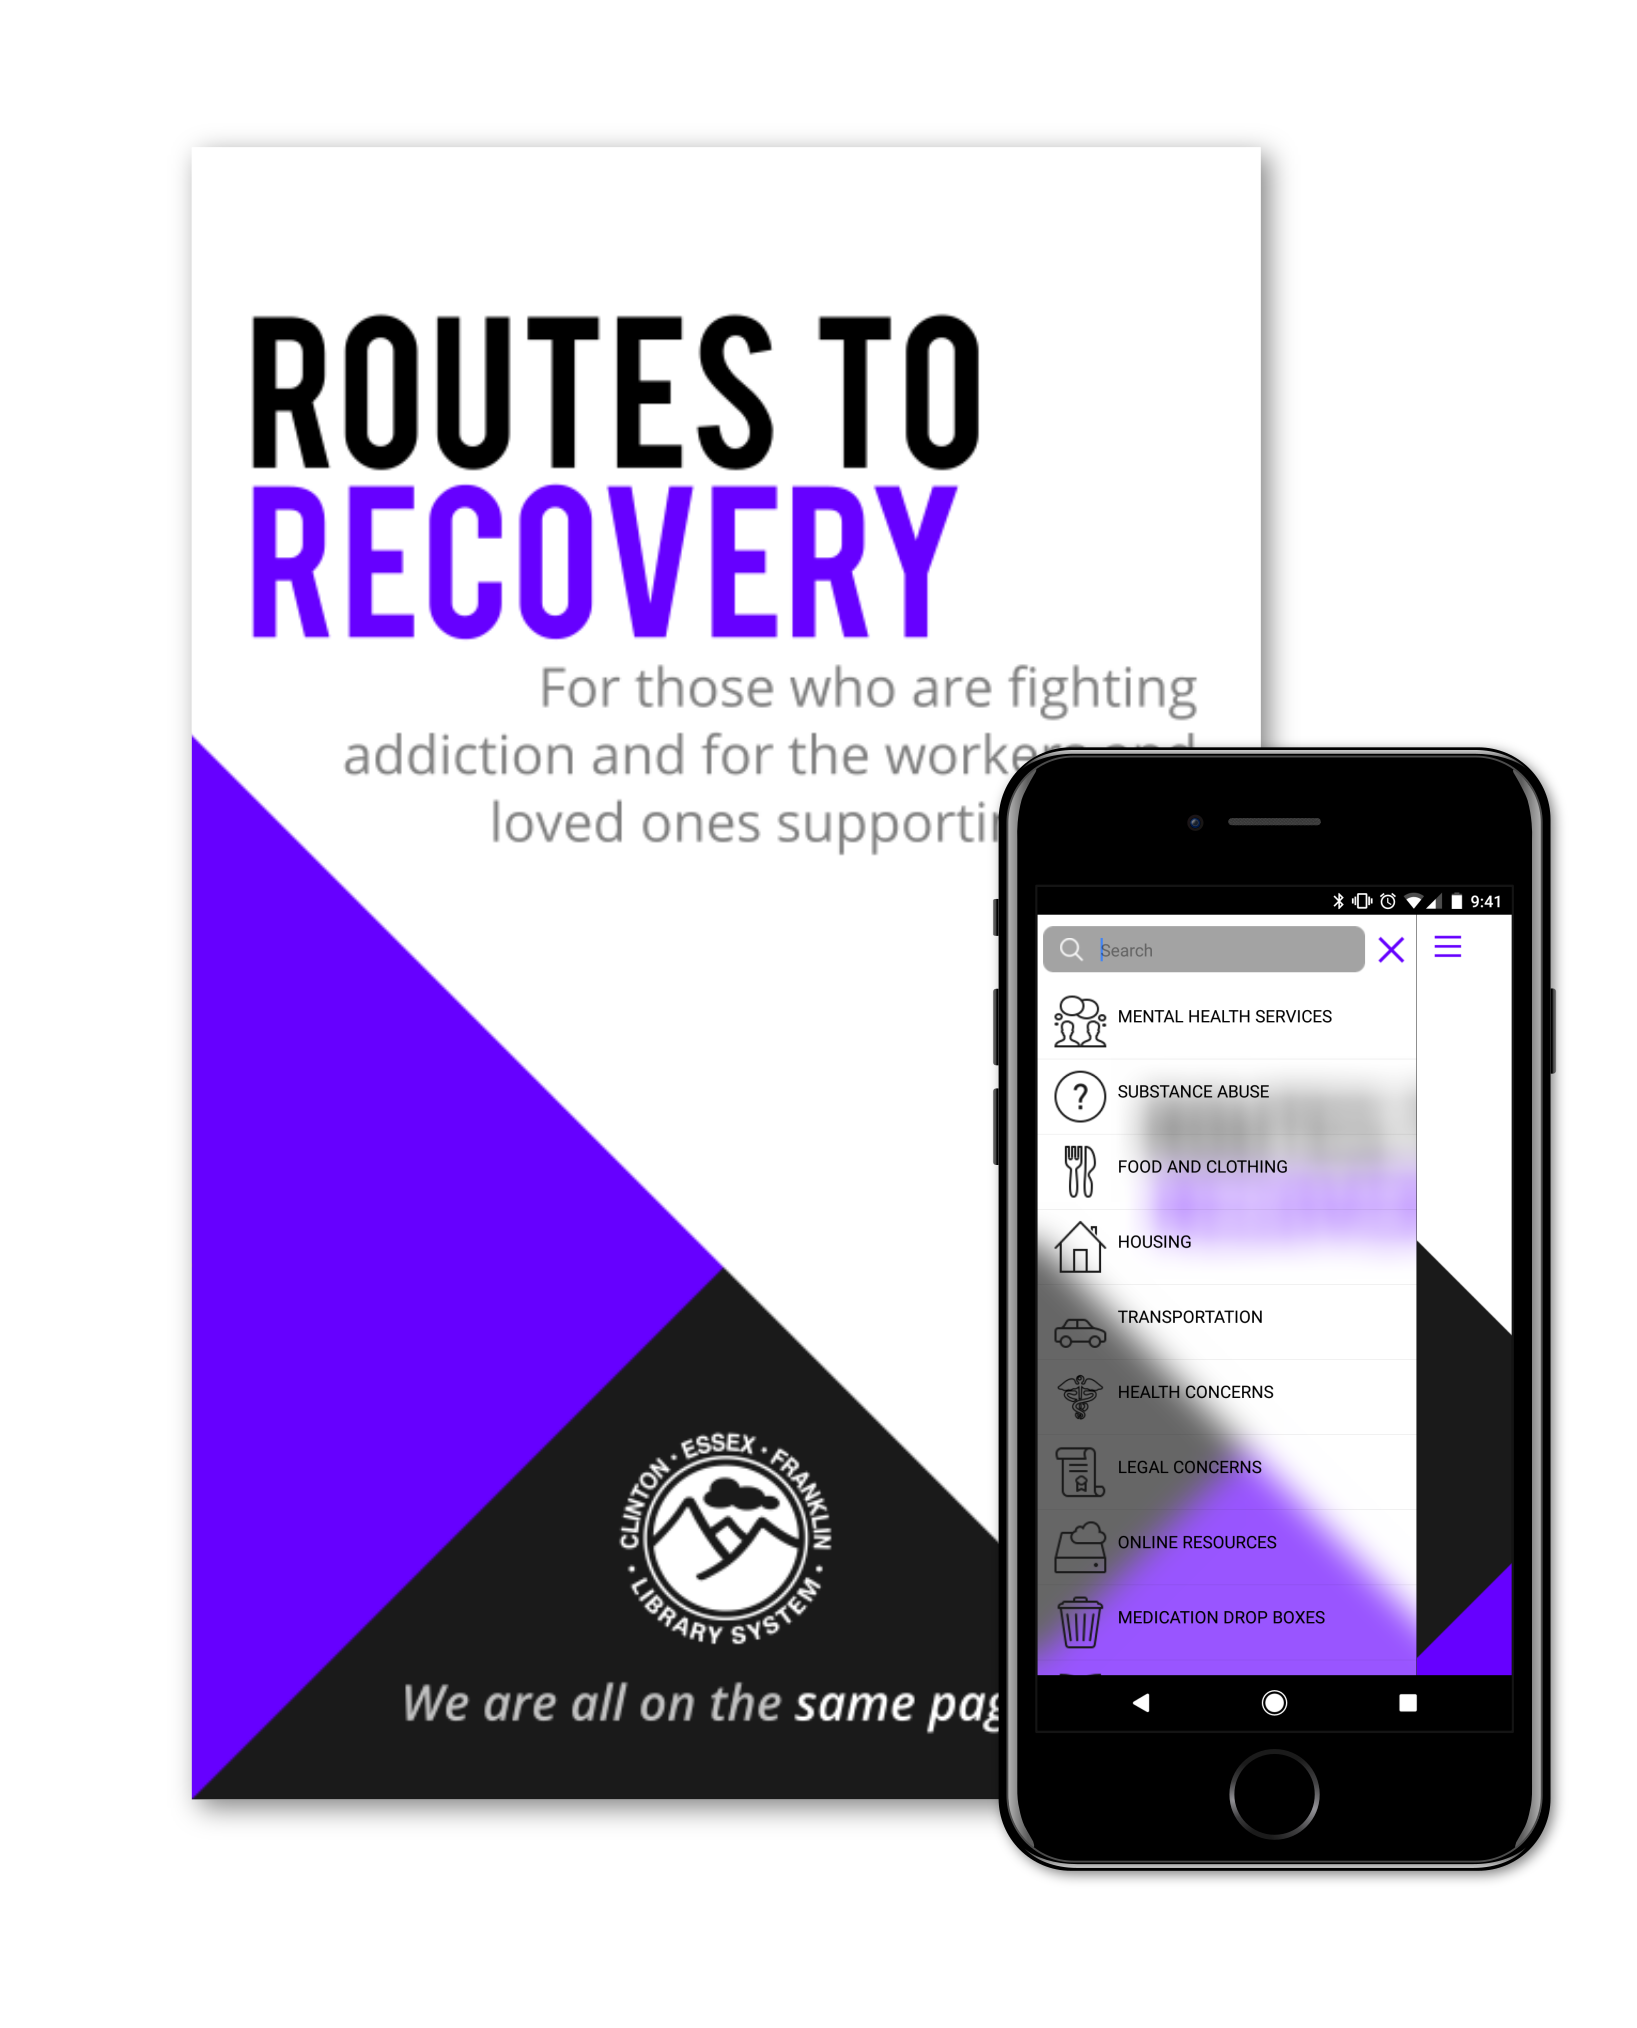 Routes to Recovery